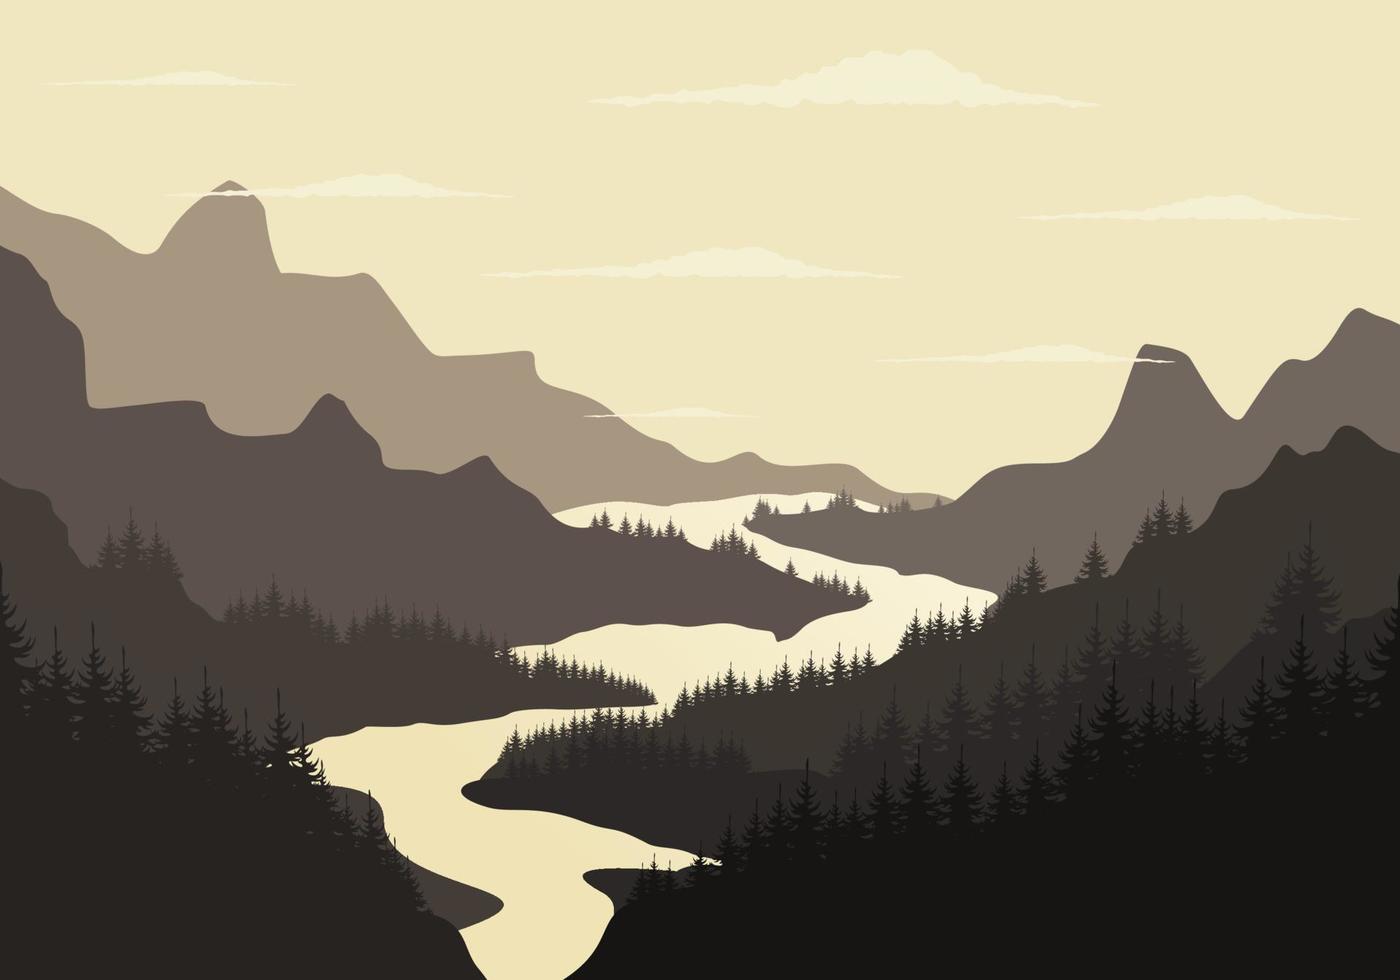 Mountain river and forest. Vector illustration